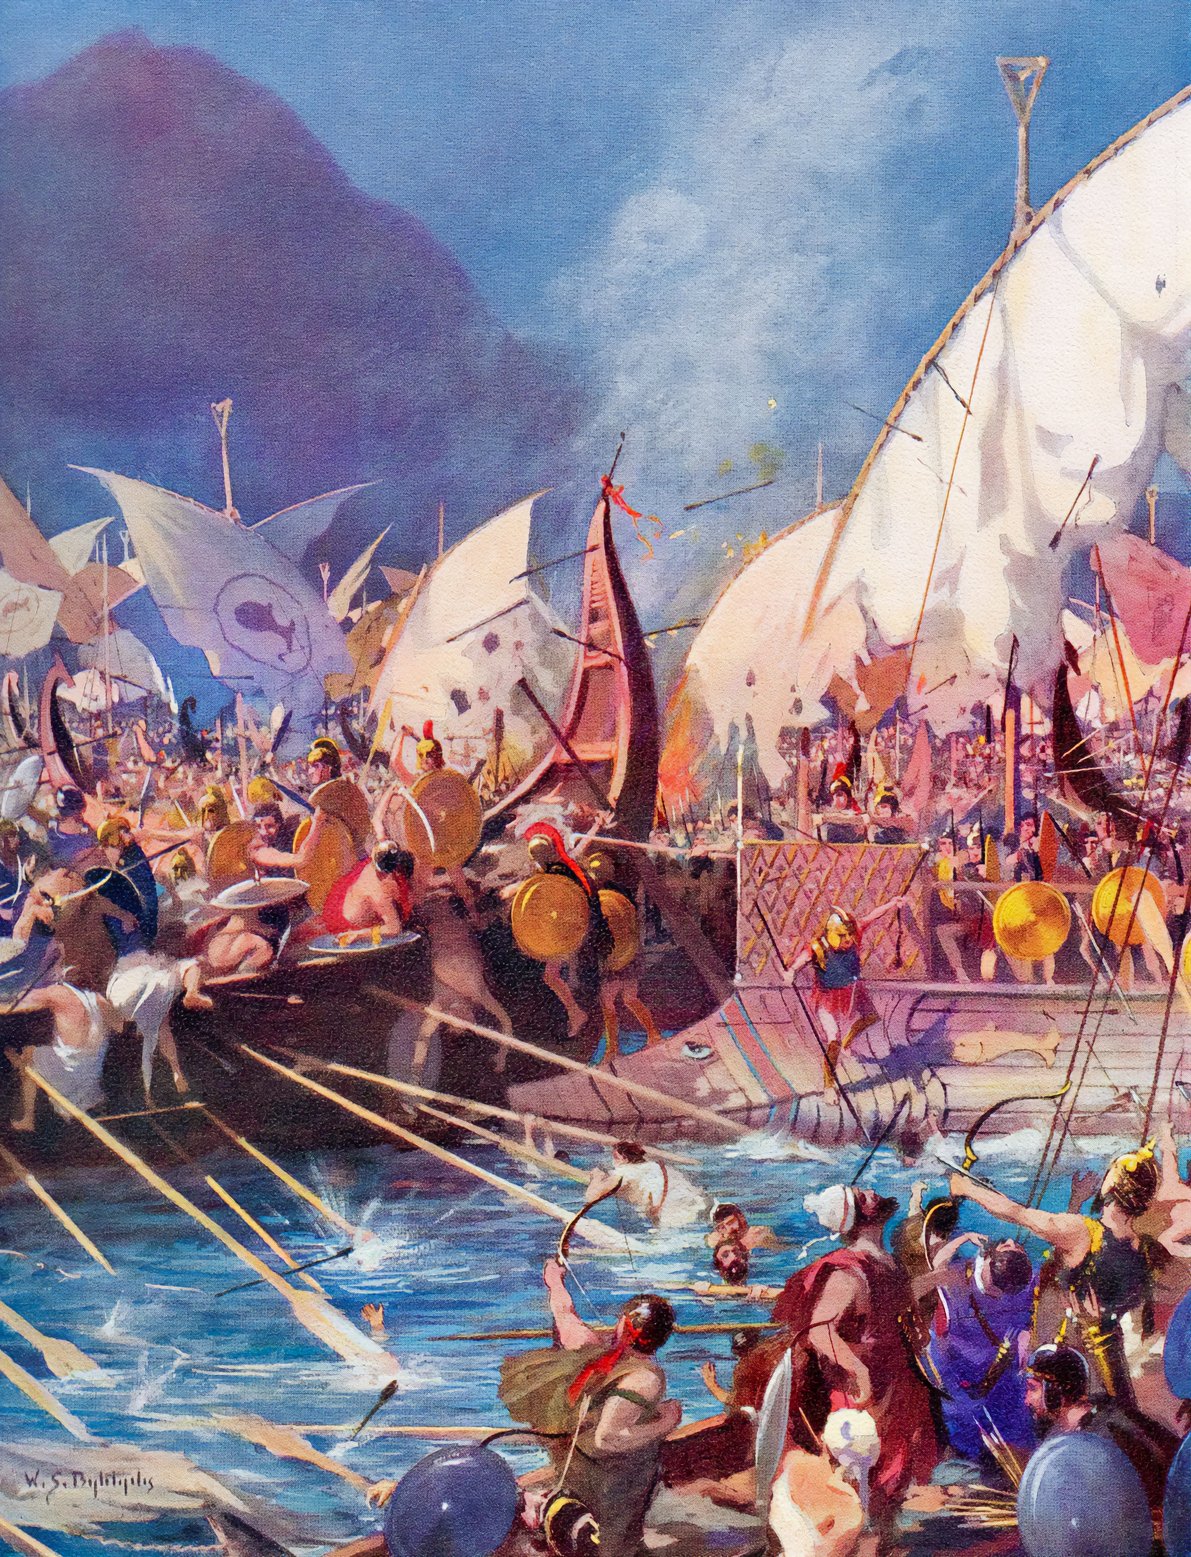 An illustration of the Battle of Salamis when Greeks prevailed over the Persian fleet.